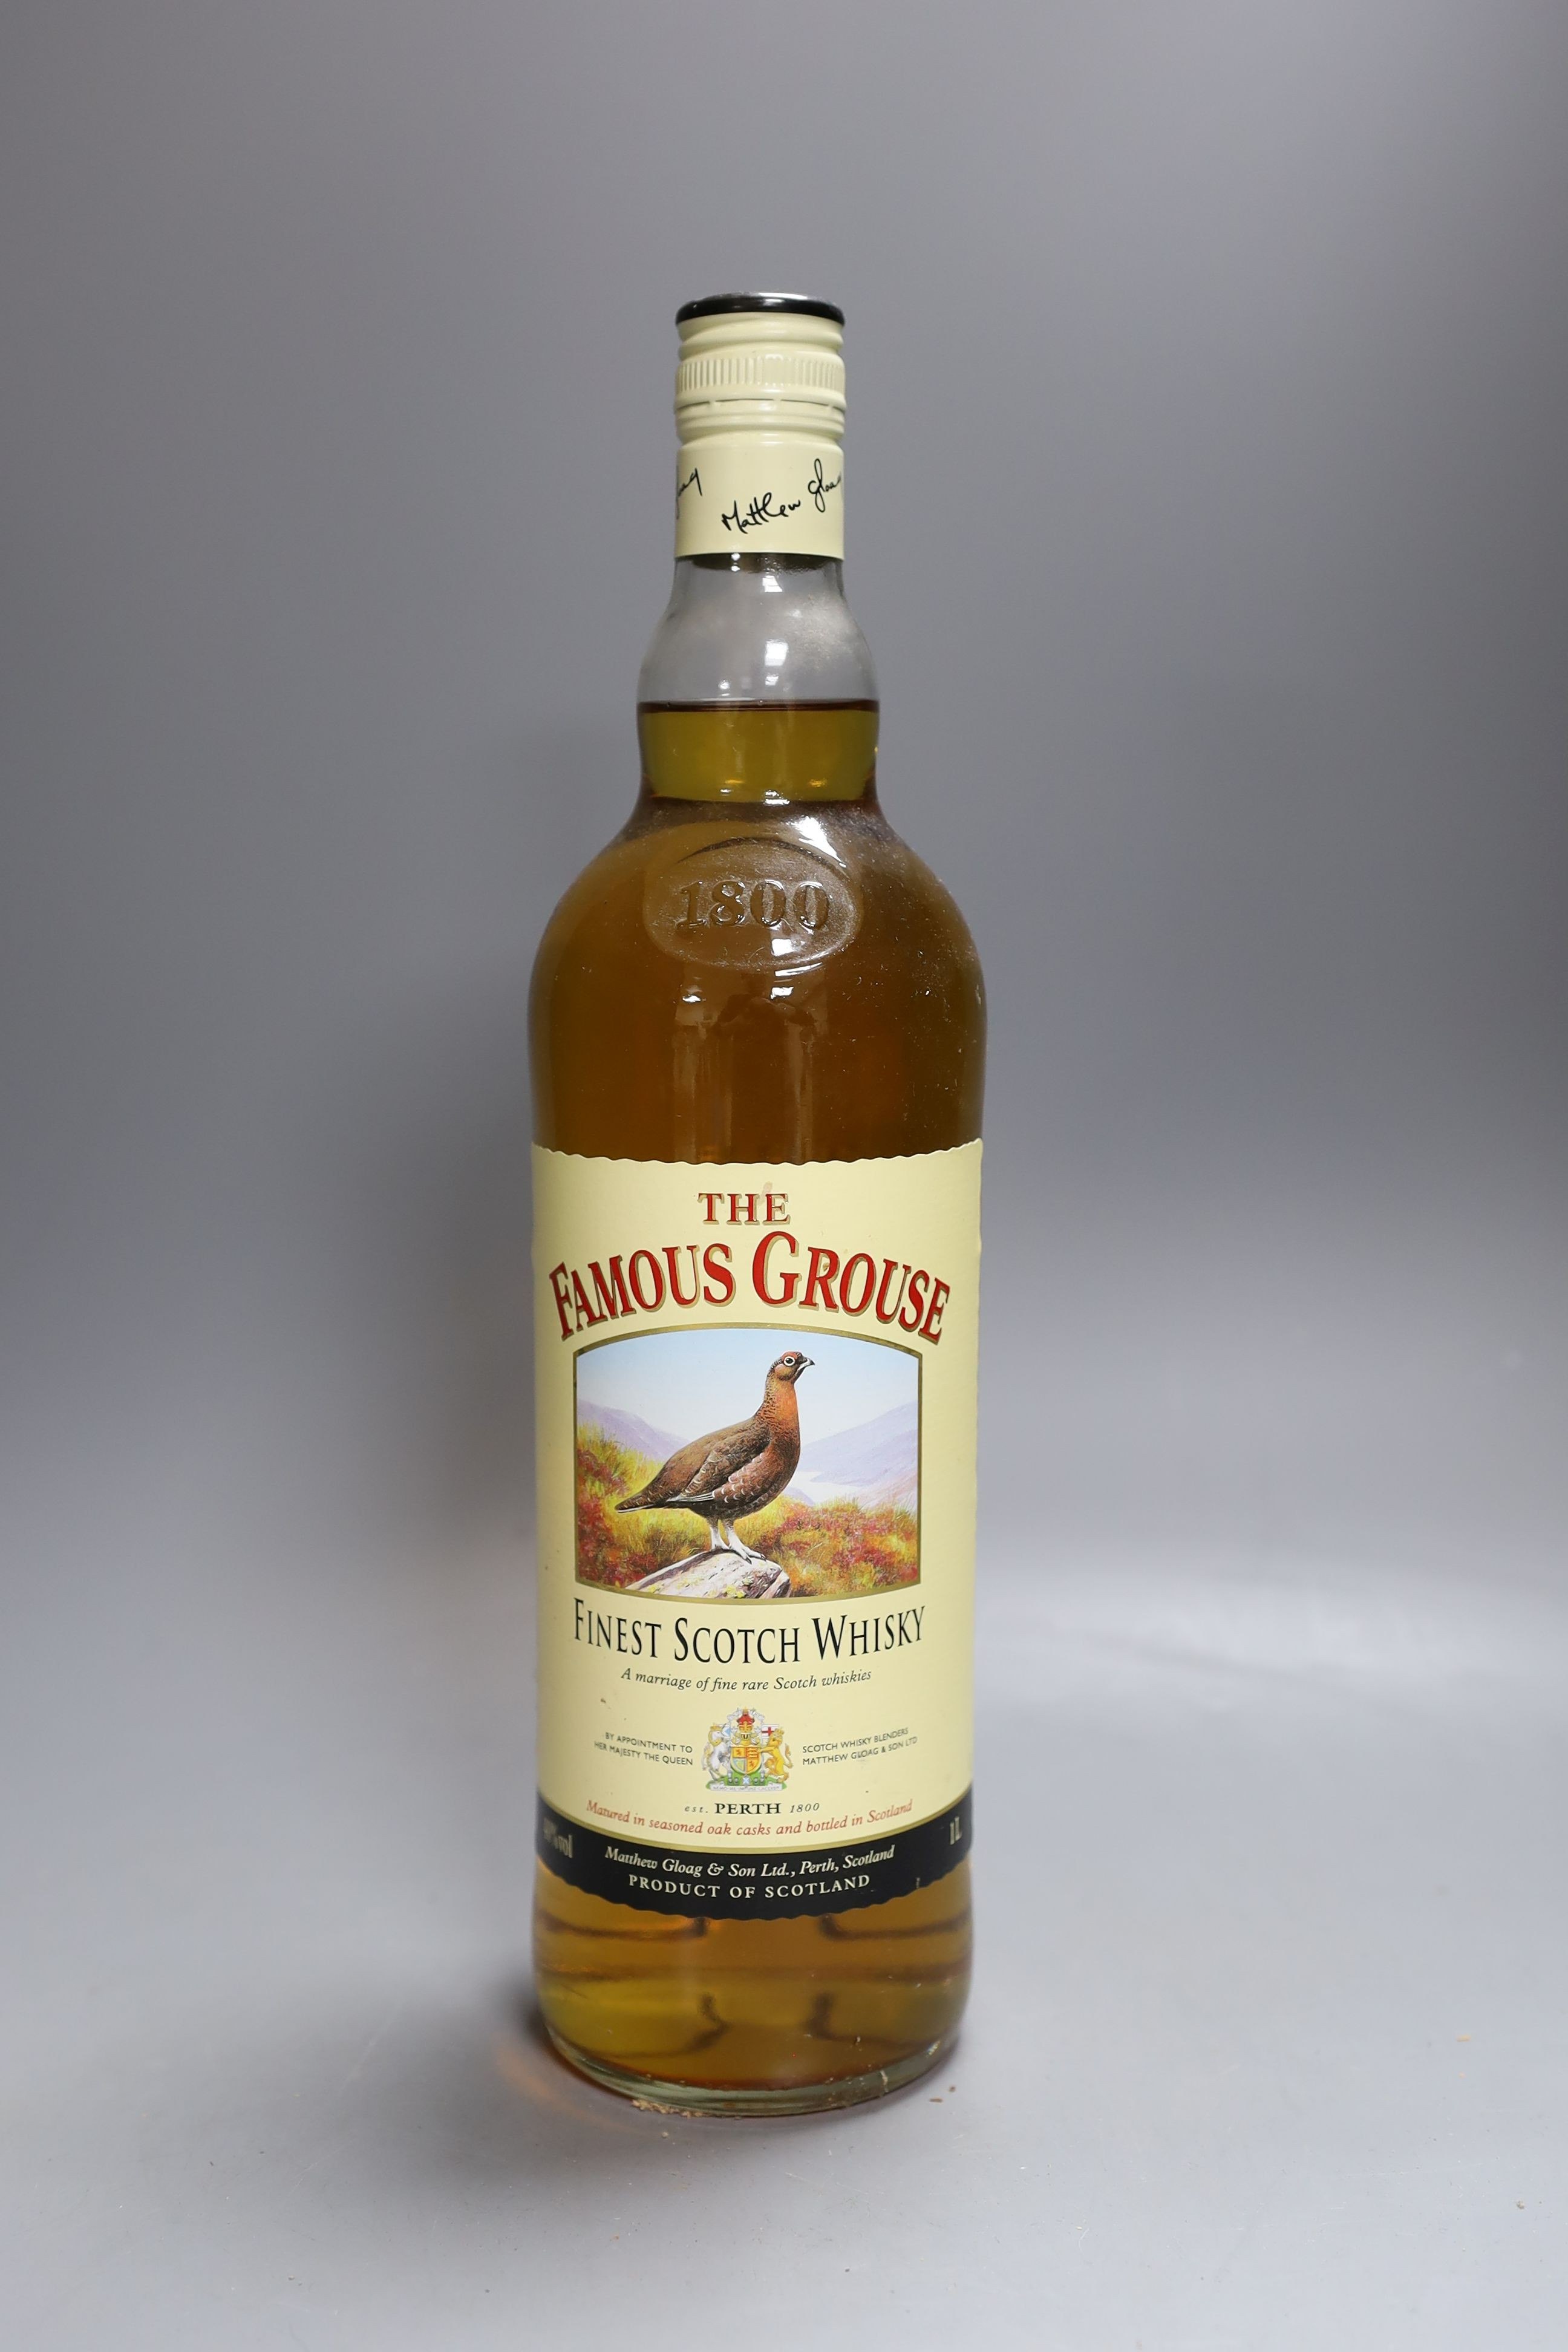 Thirteen single litre bottles of The Famous Grouse scotch whisky